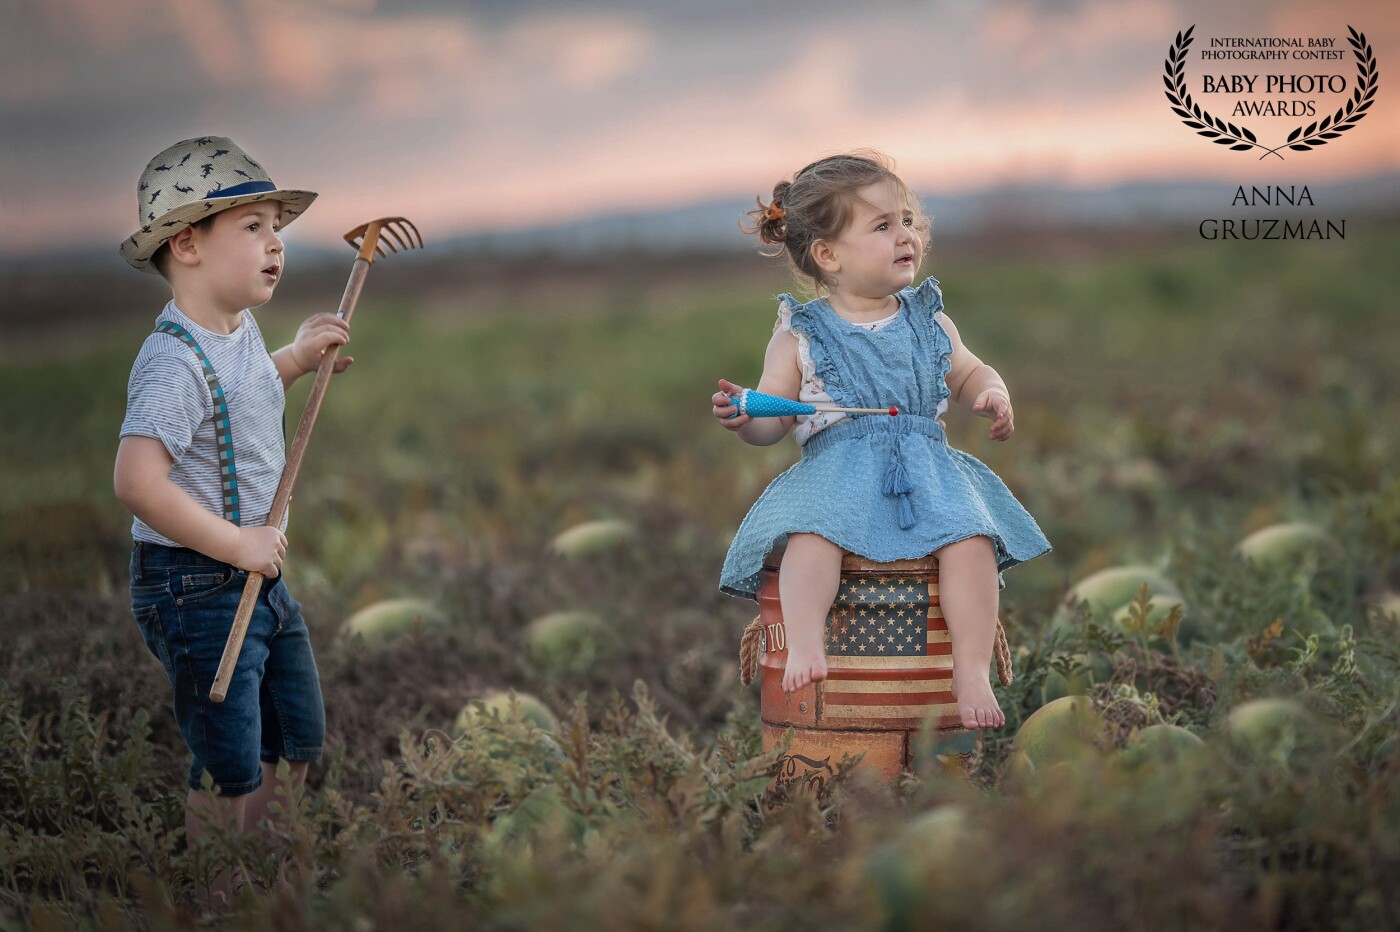 A picture of my own children - Adam and Emma in a watermelon field.  My favorite part of children's photography is their curiosity about nature.  The smile on their faces to discover new things is worth every moment.